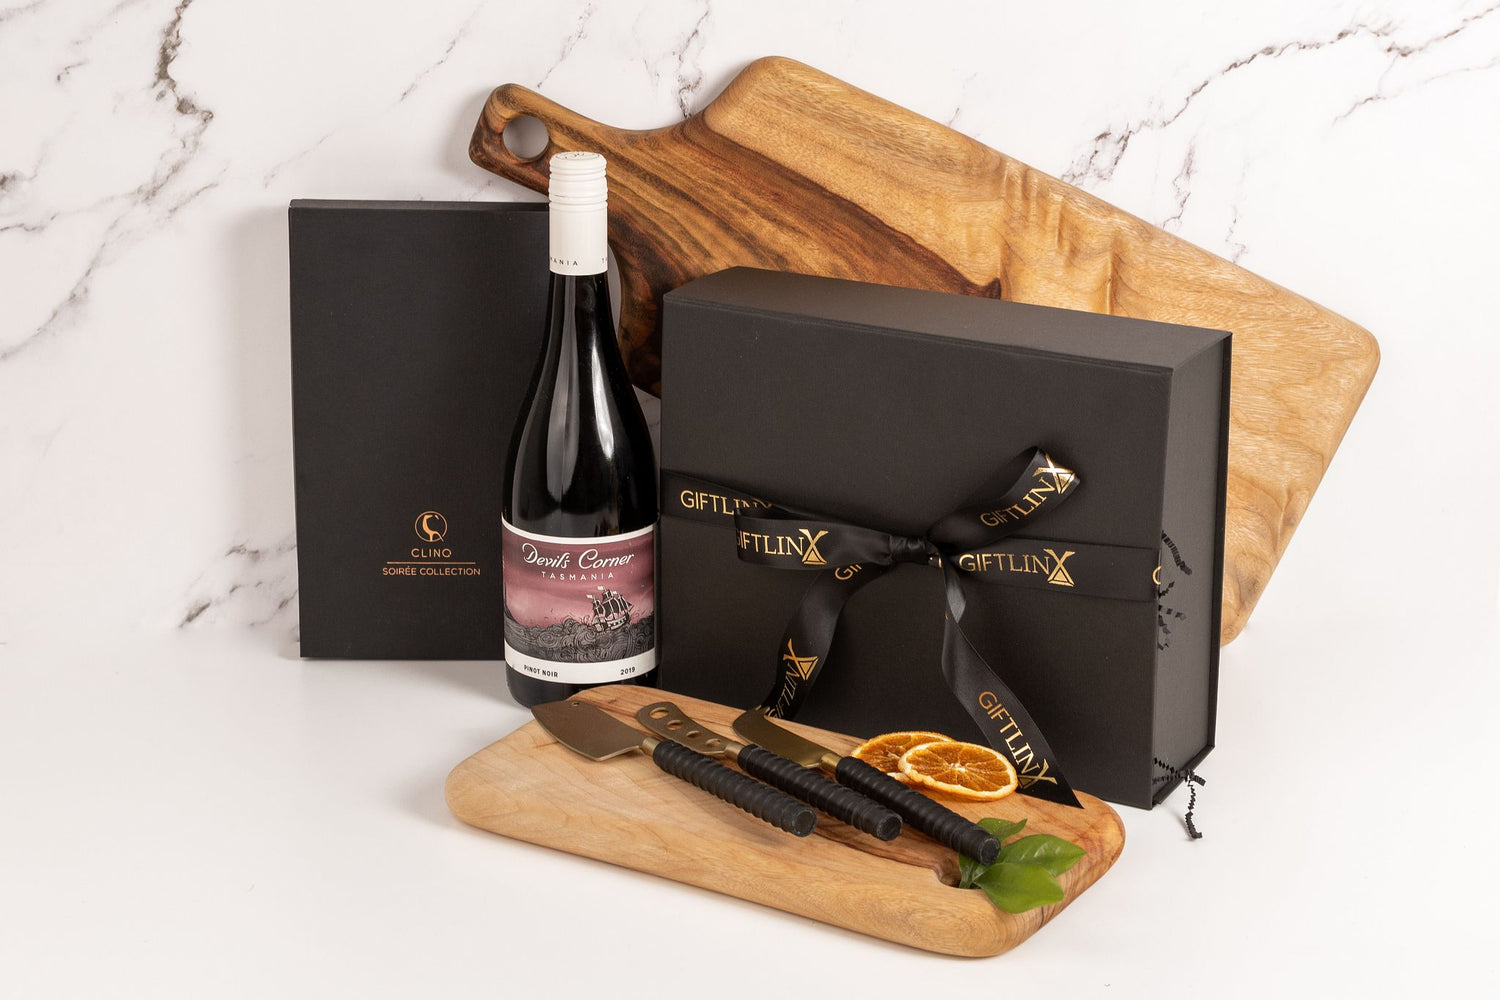 Luxury Corporate Gift box in black with black and gold branded ribbon tied in a bow with premium Australian product like handcrafted timber cheese board, cheese knife set, Australian wine.